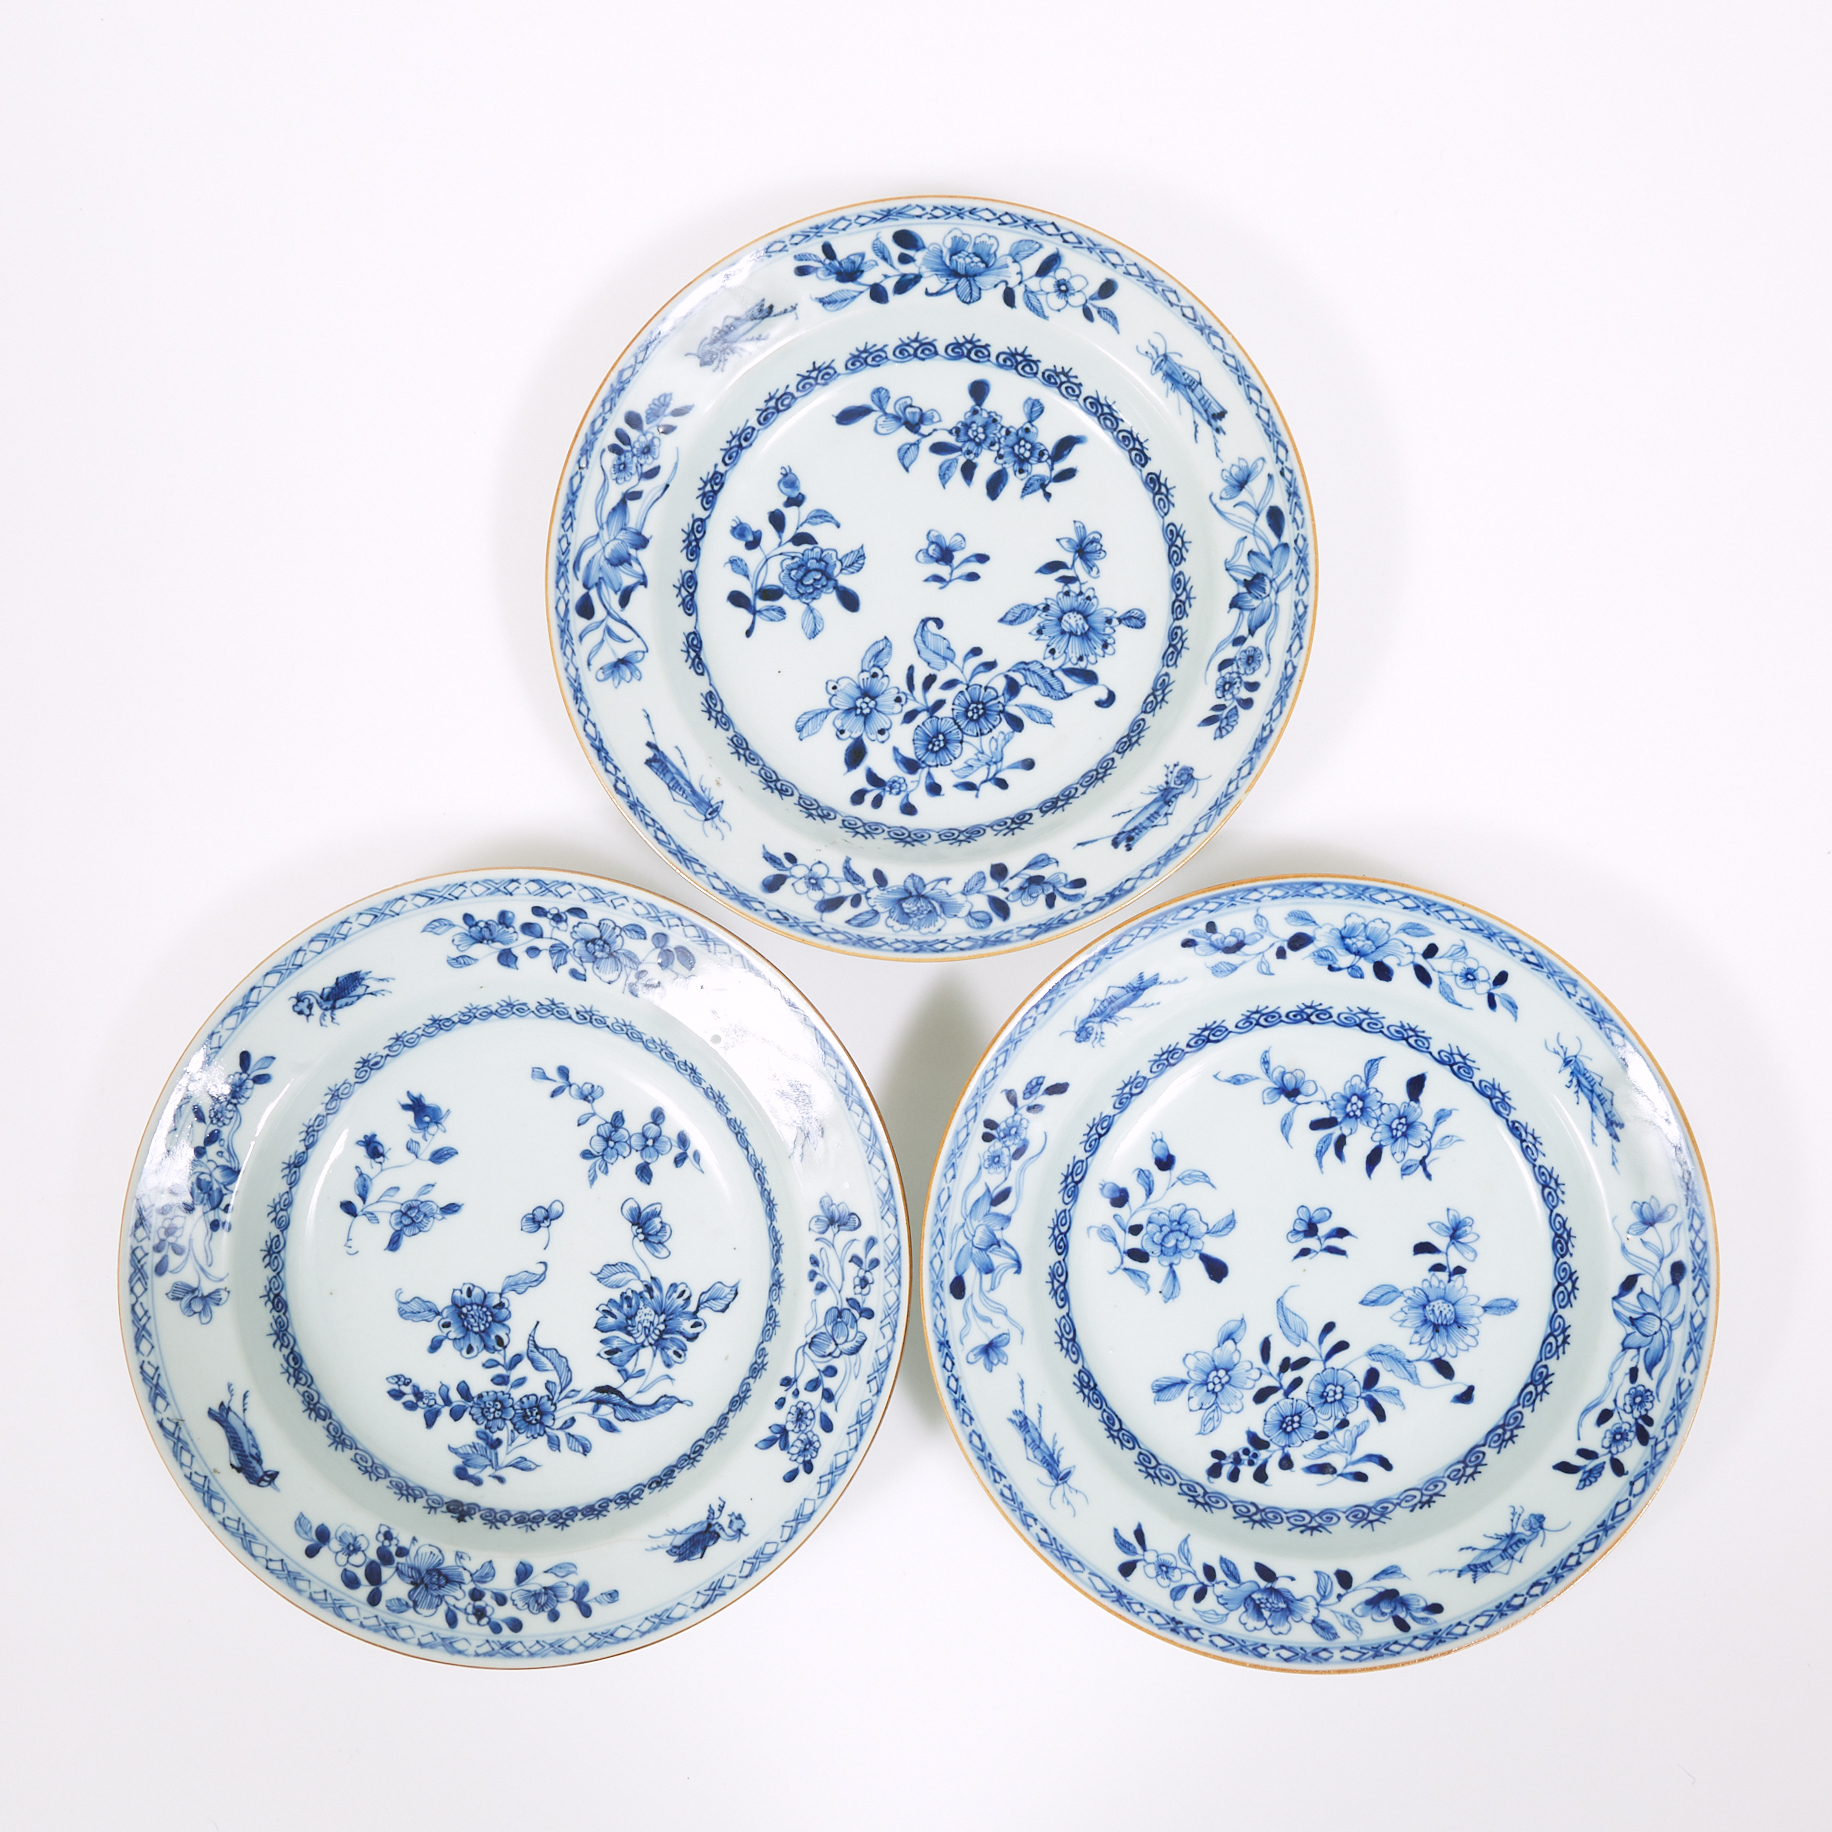 A Set of Three Blue and White 'Floral' Dishes, 18th Century